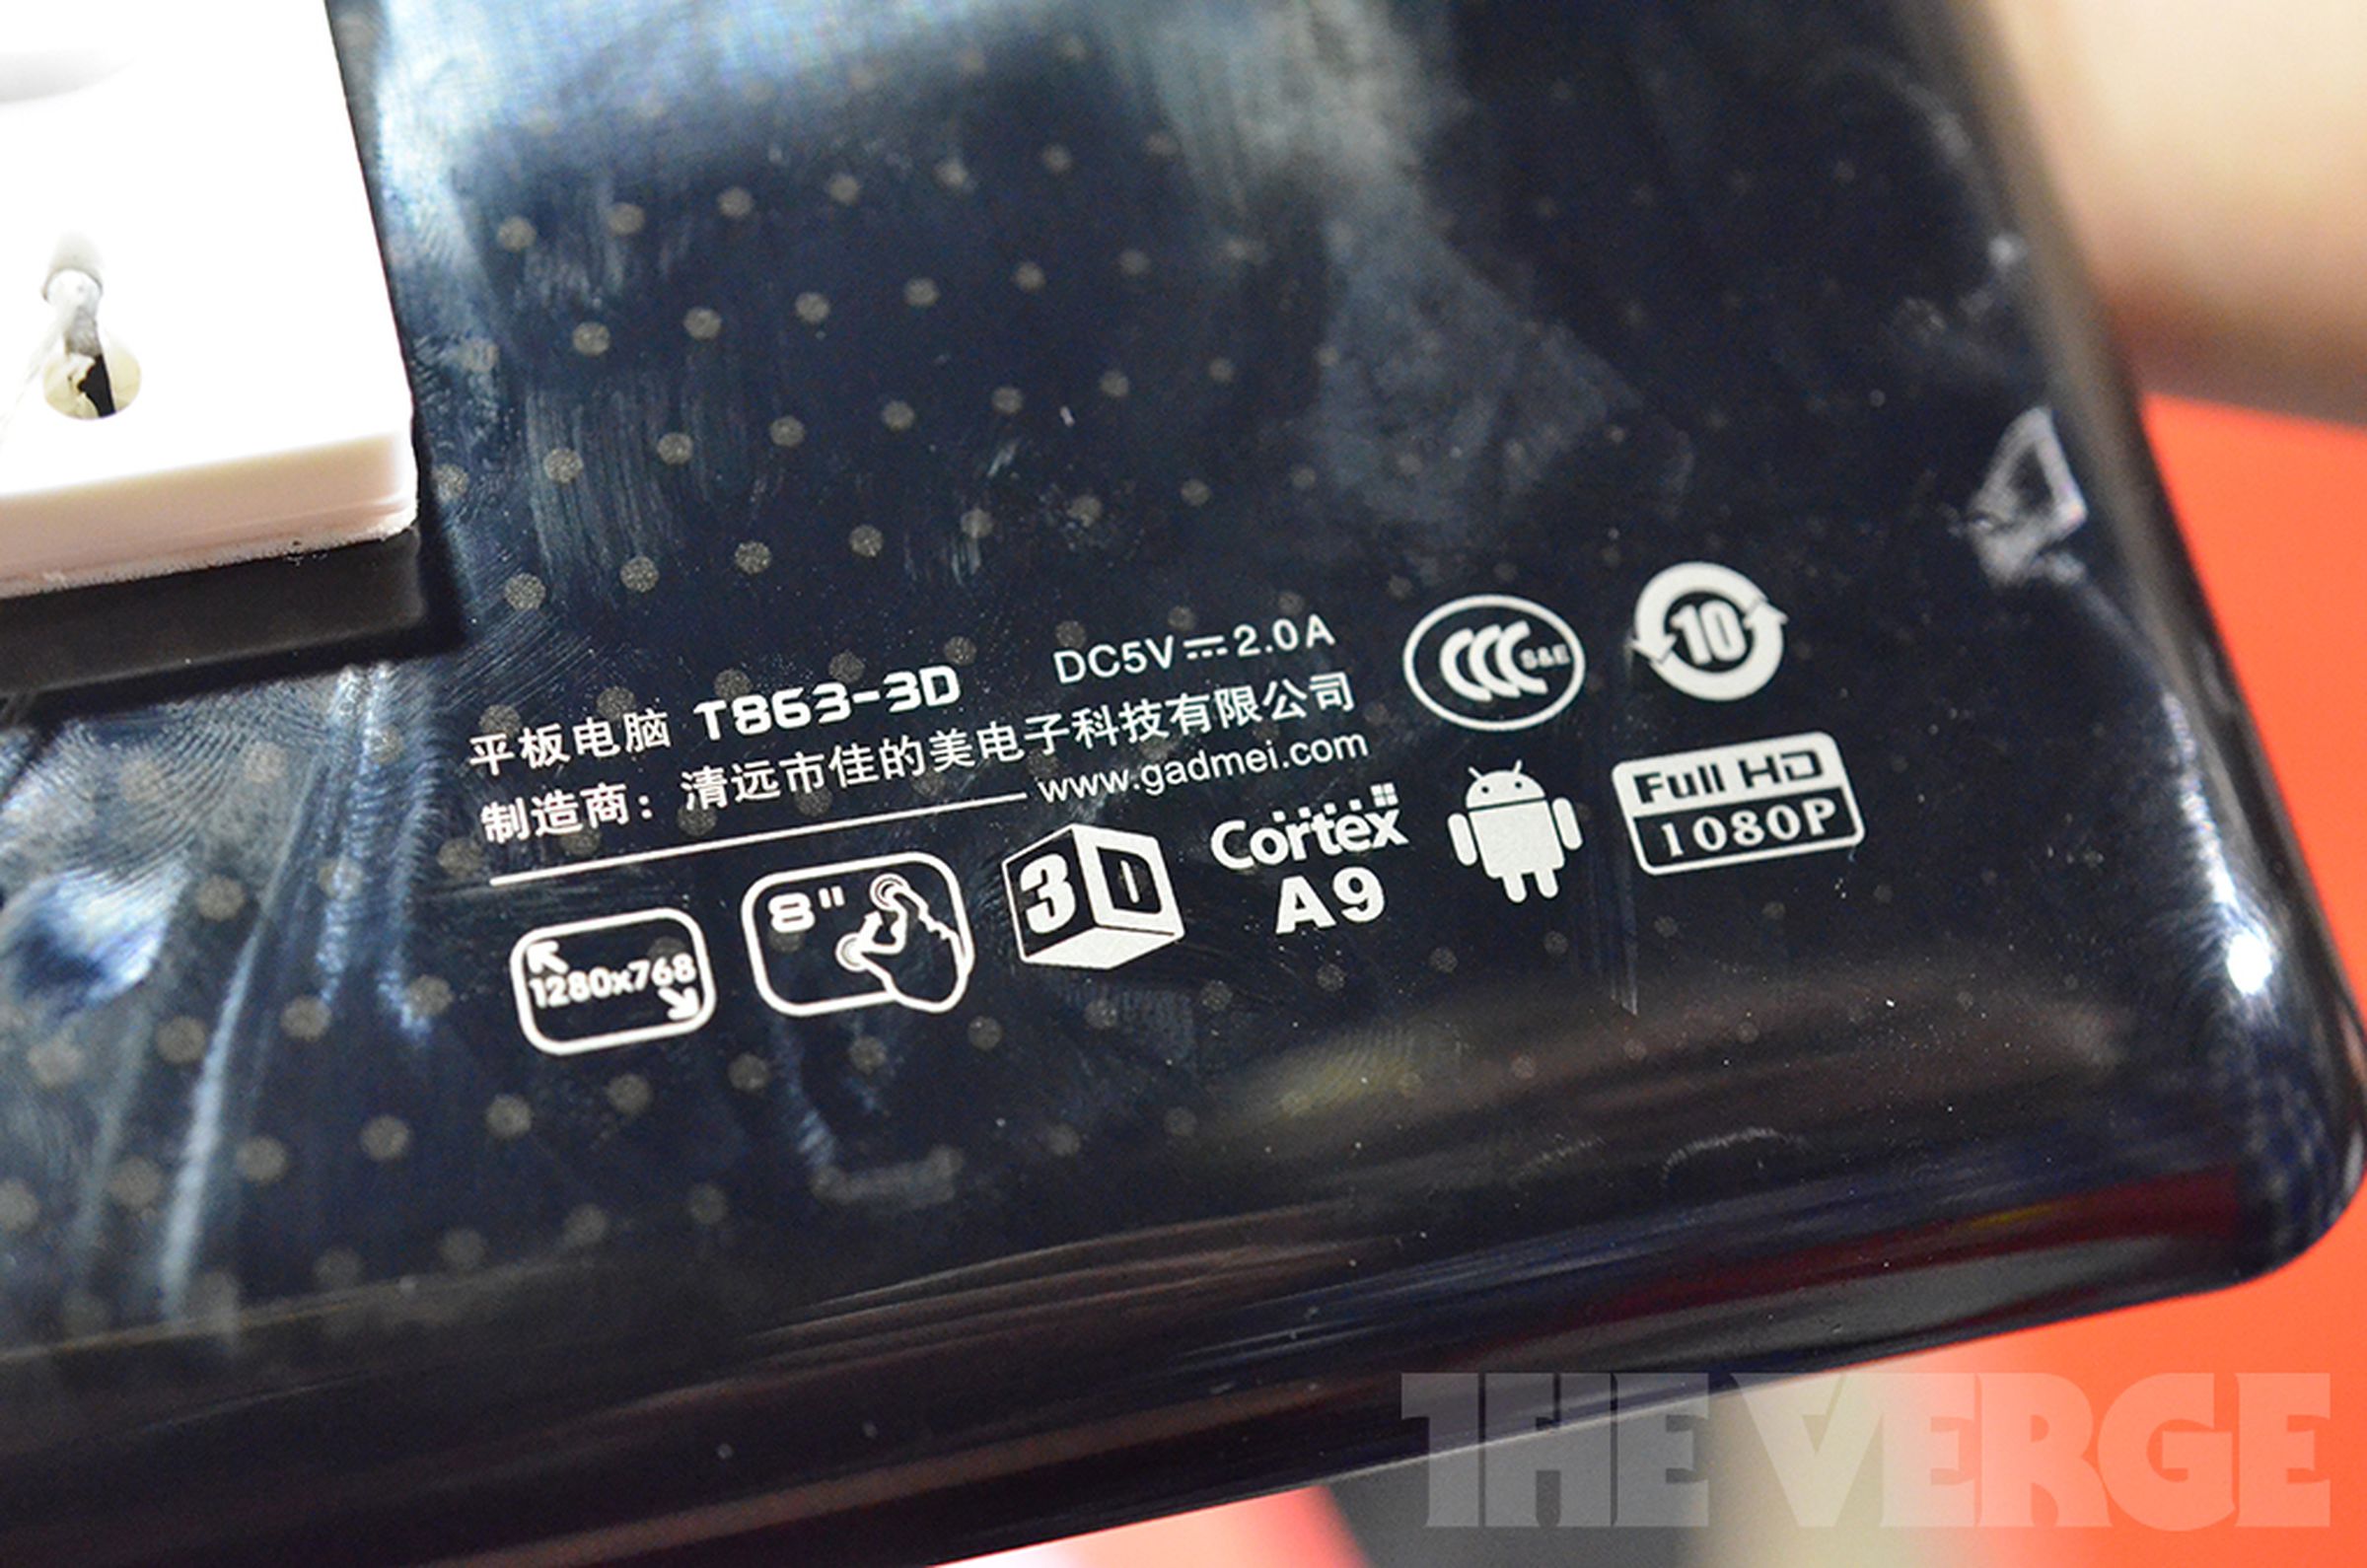 Gadmei T863 and E8-3D glasses-free 3D Ice Cream Sandwich tablets hands-on photos